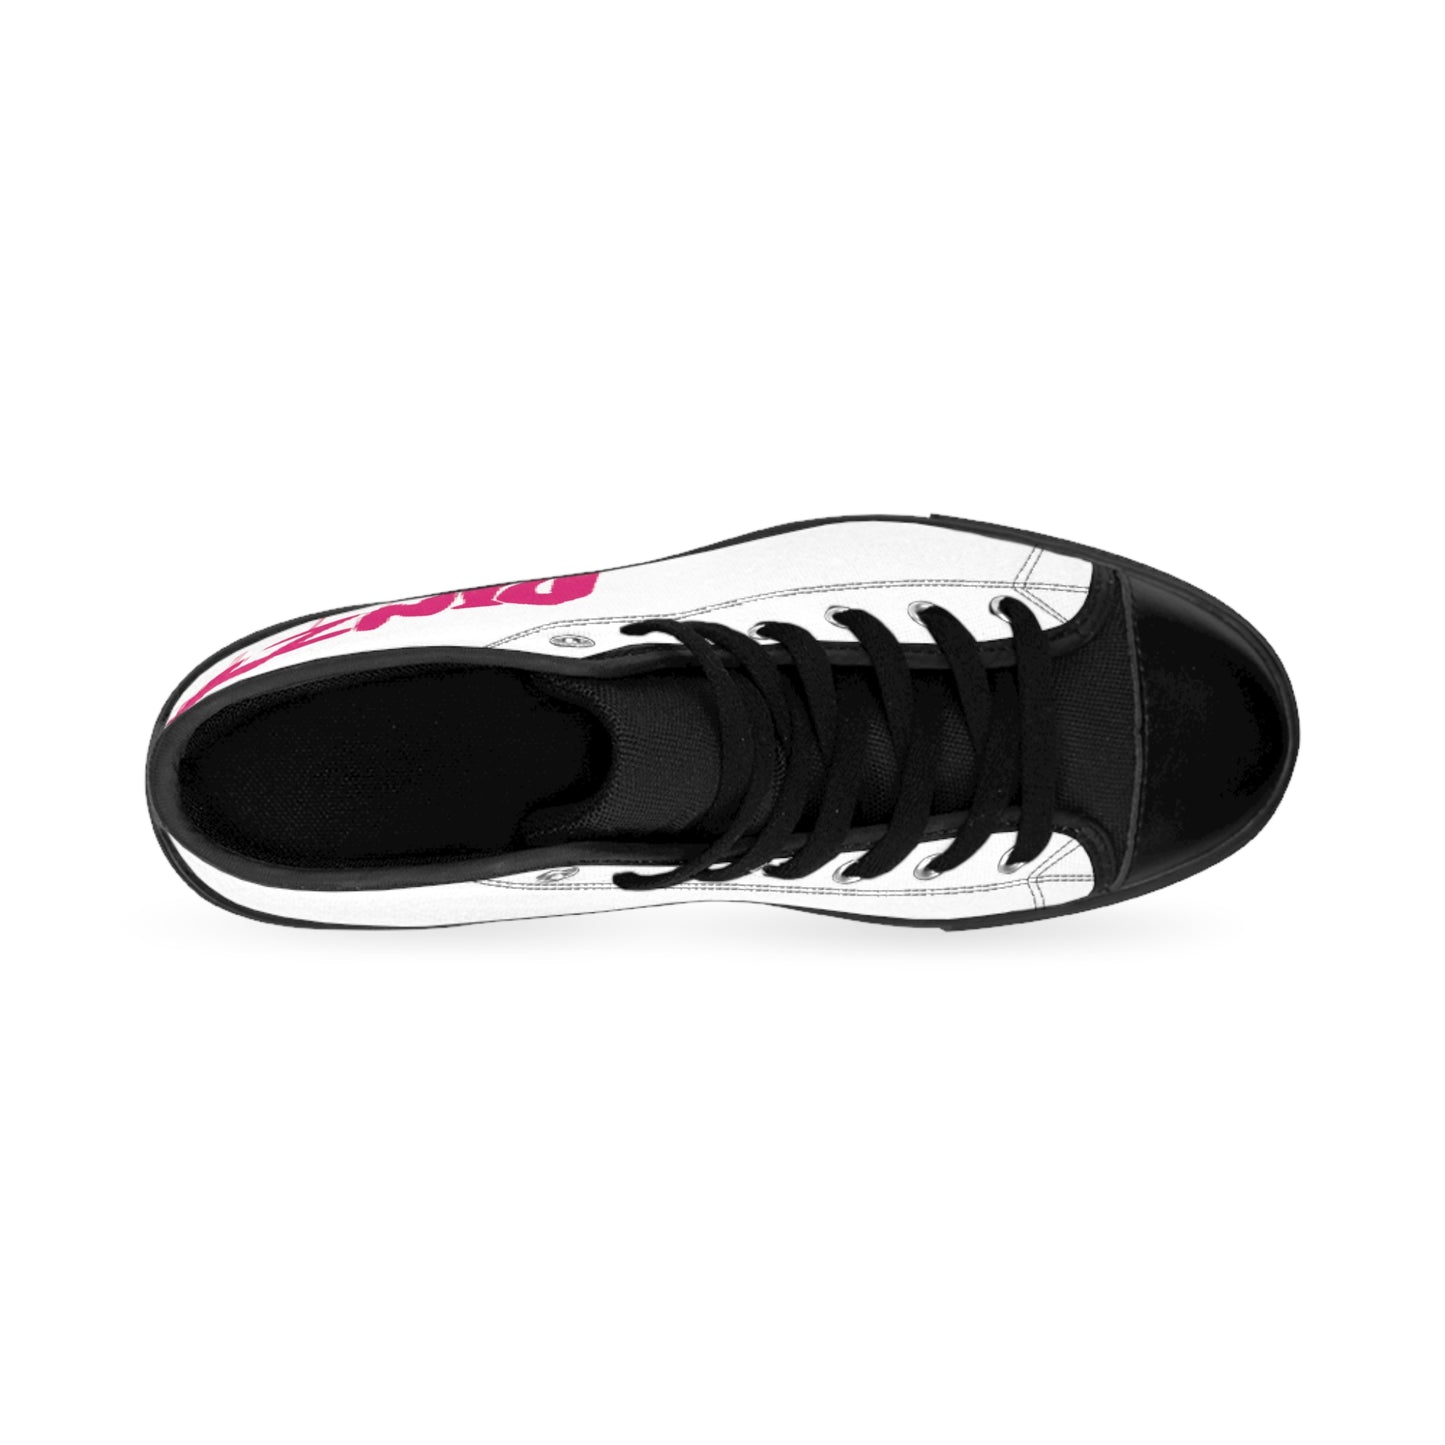 Men's Sized Classic Sneakers